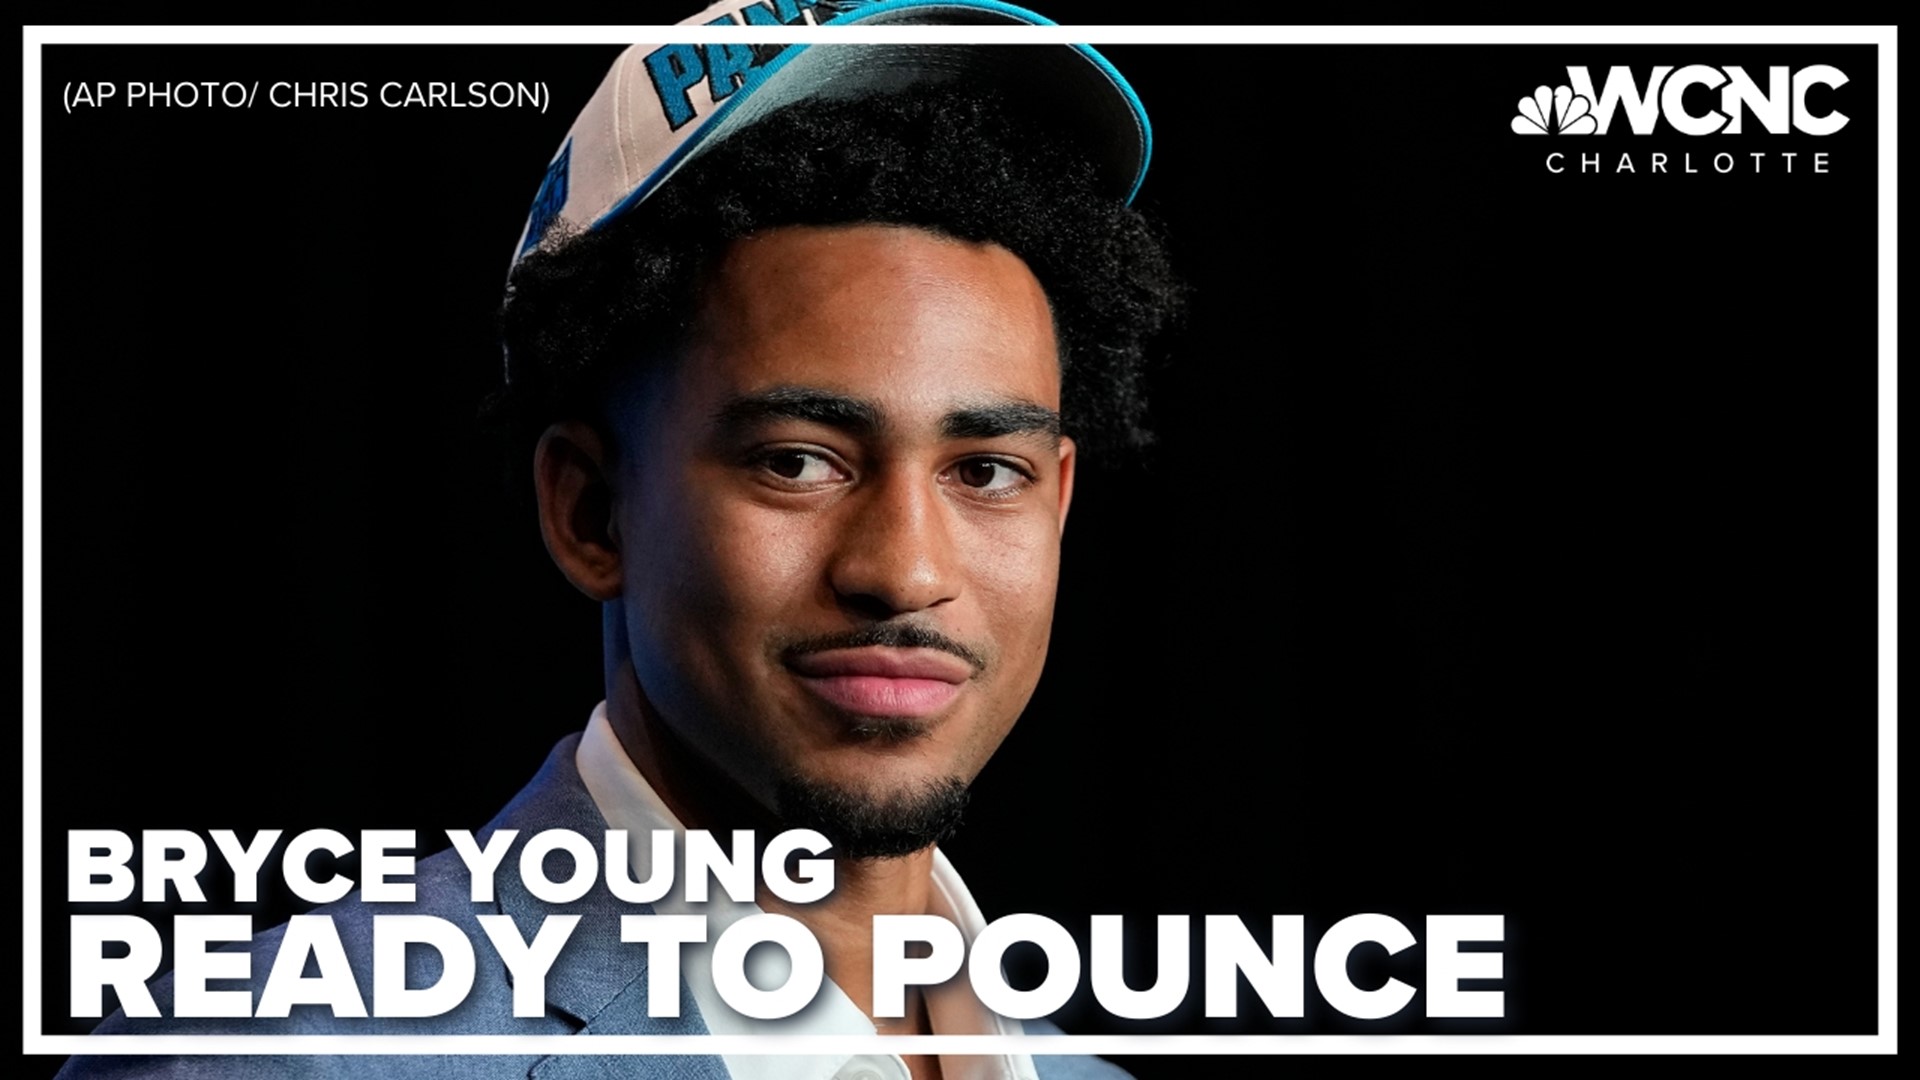 Carolina drafted Young number one overall in last night's NFL Draft.